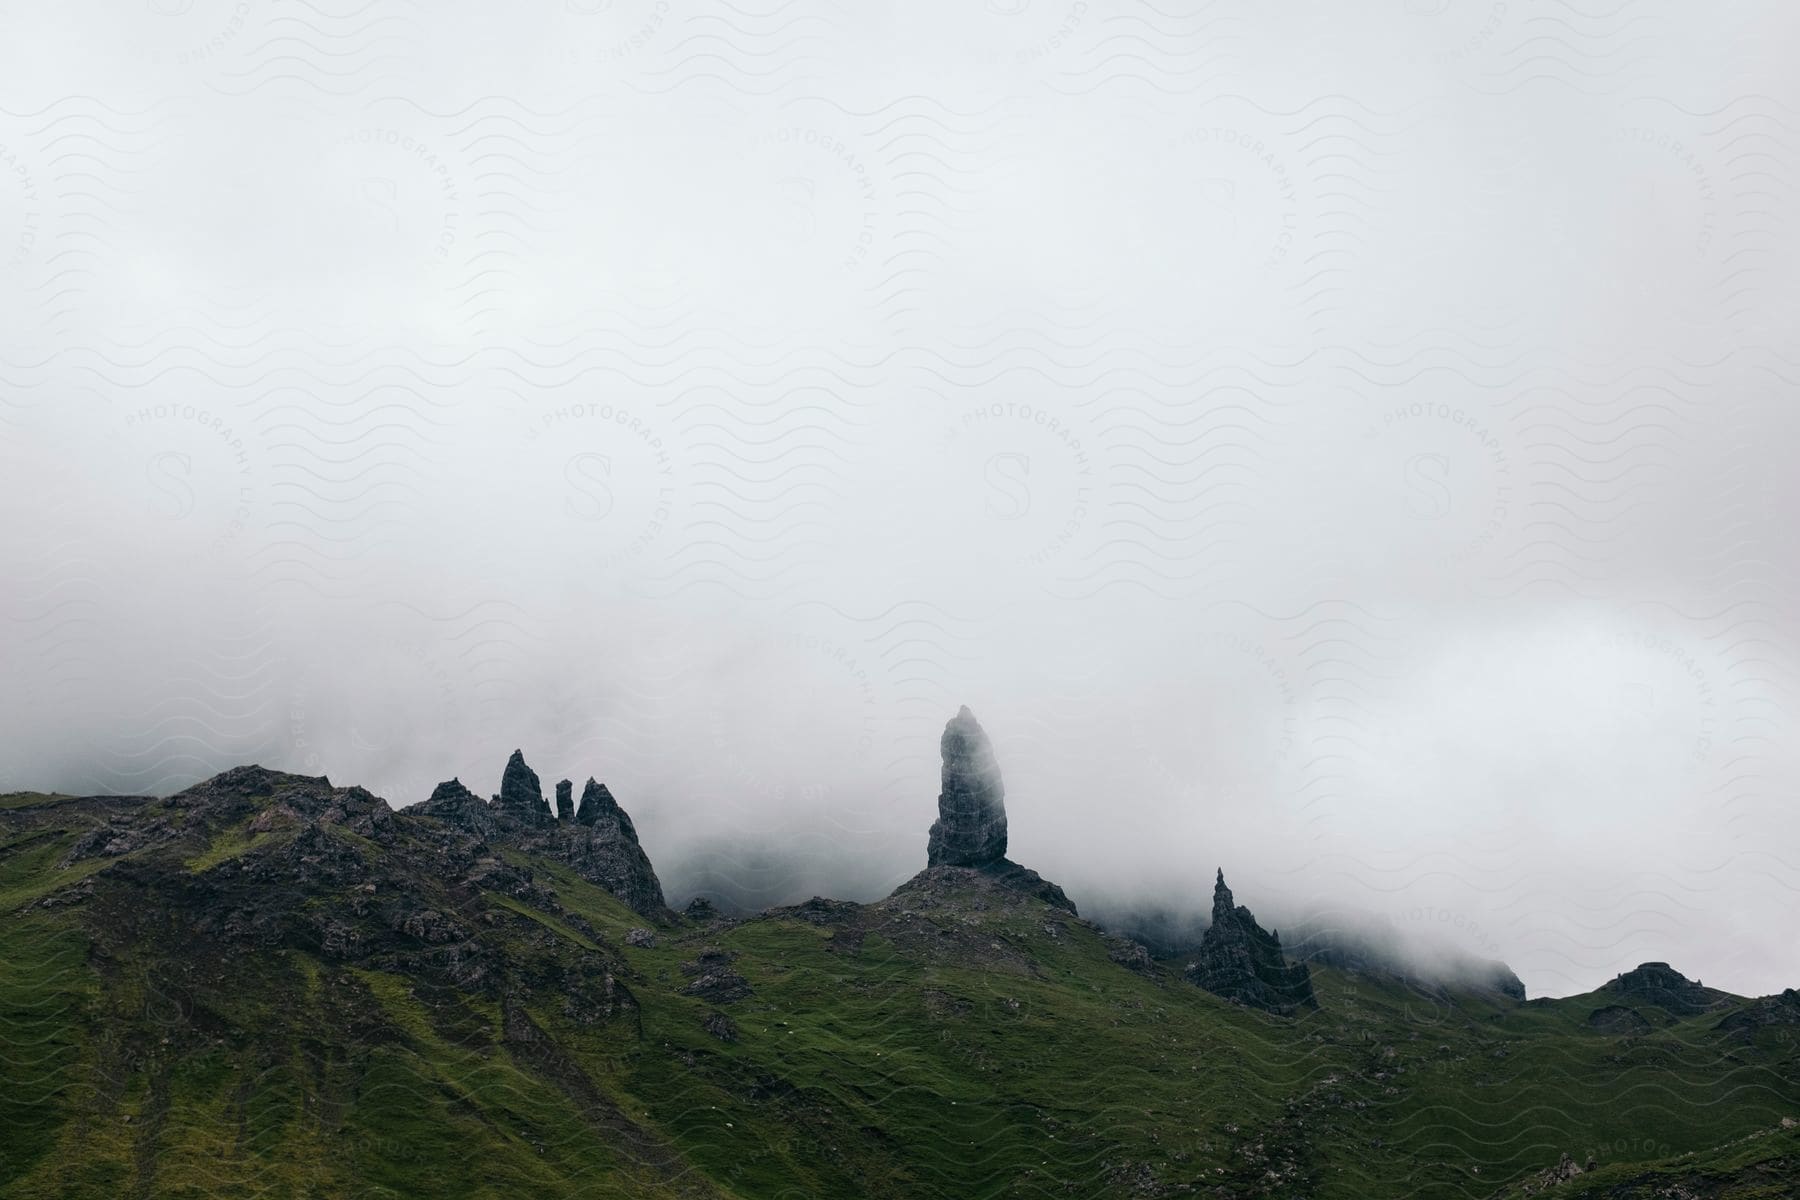 Rock formation on a grassy foggy mountain